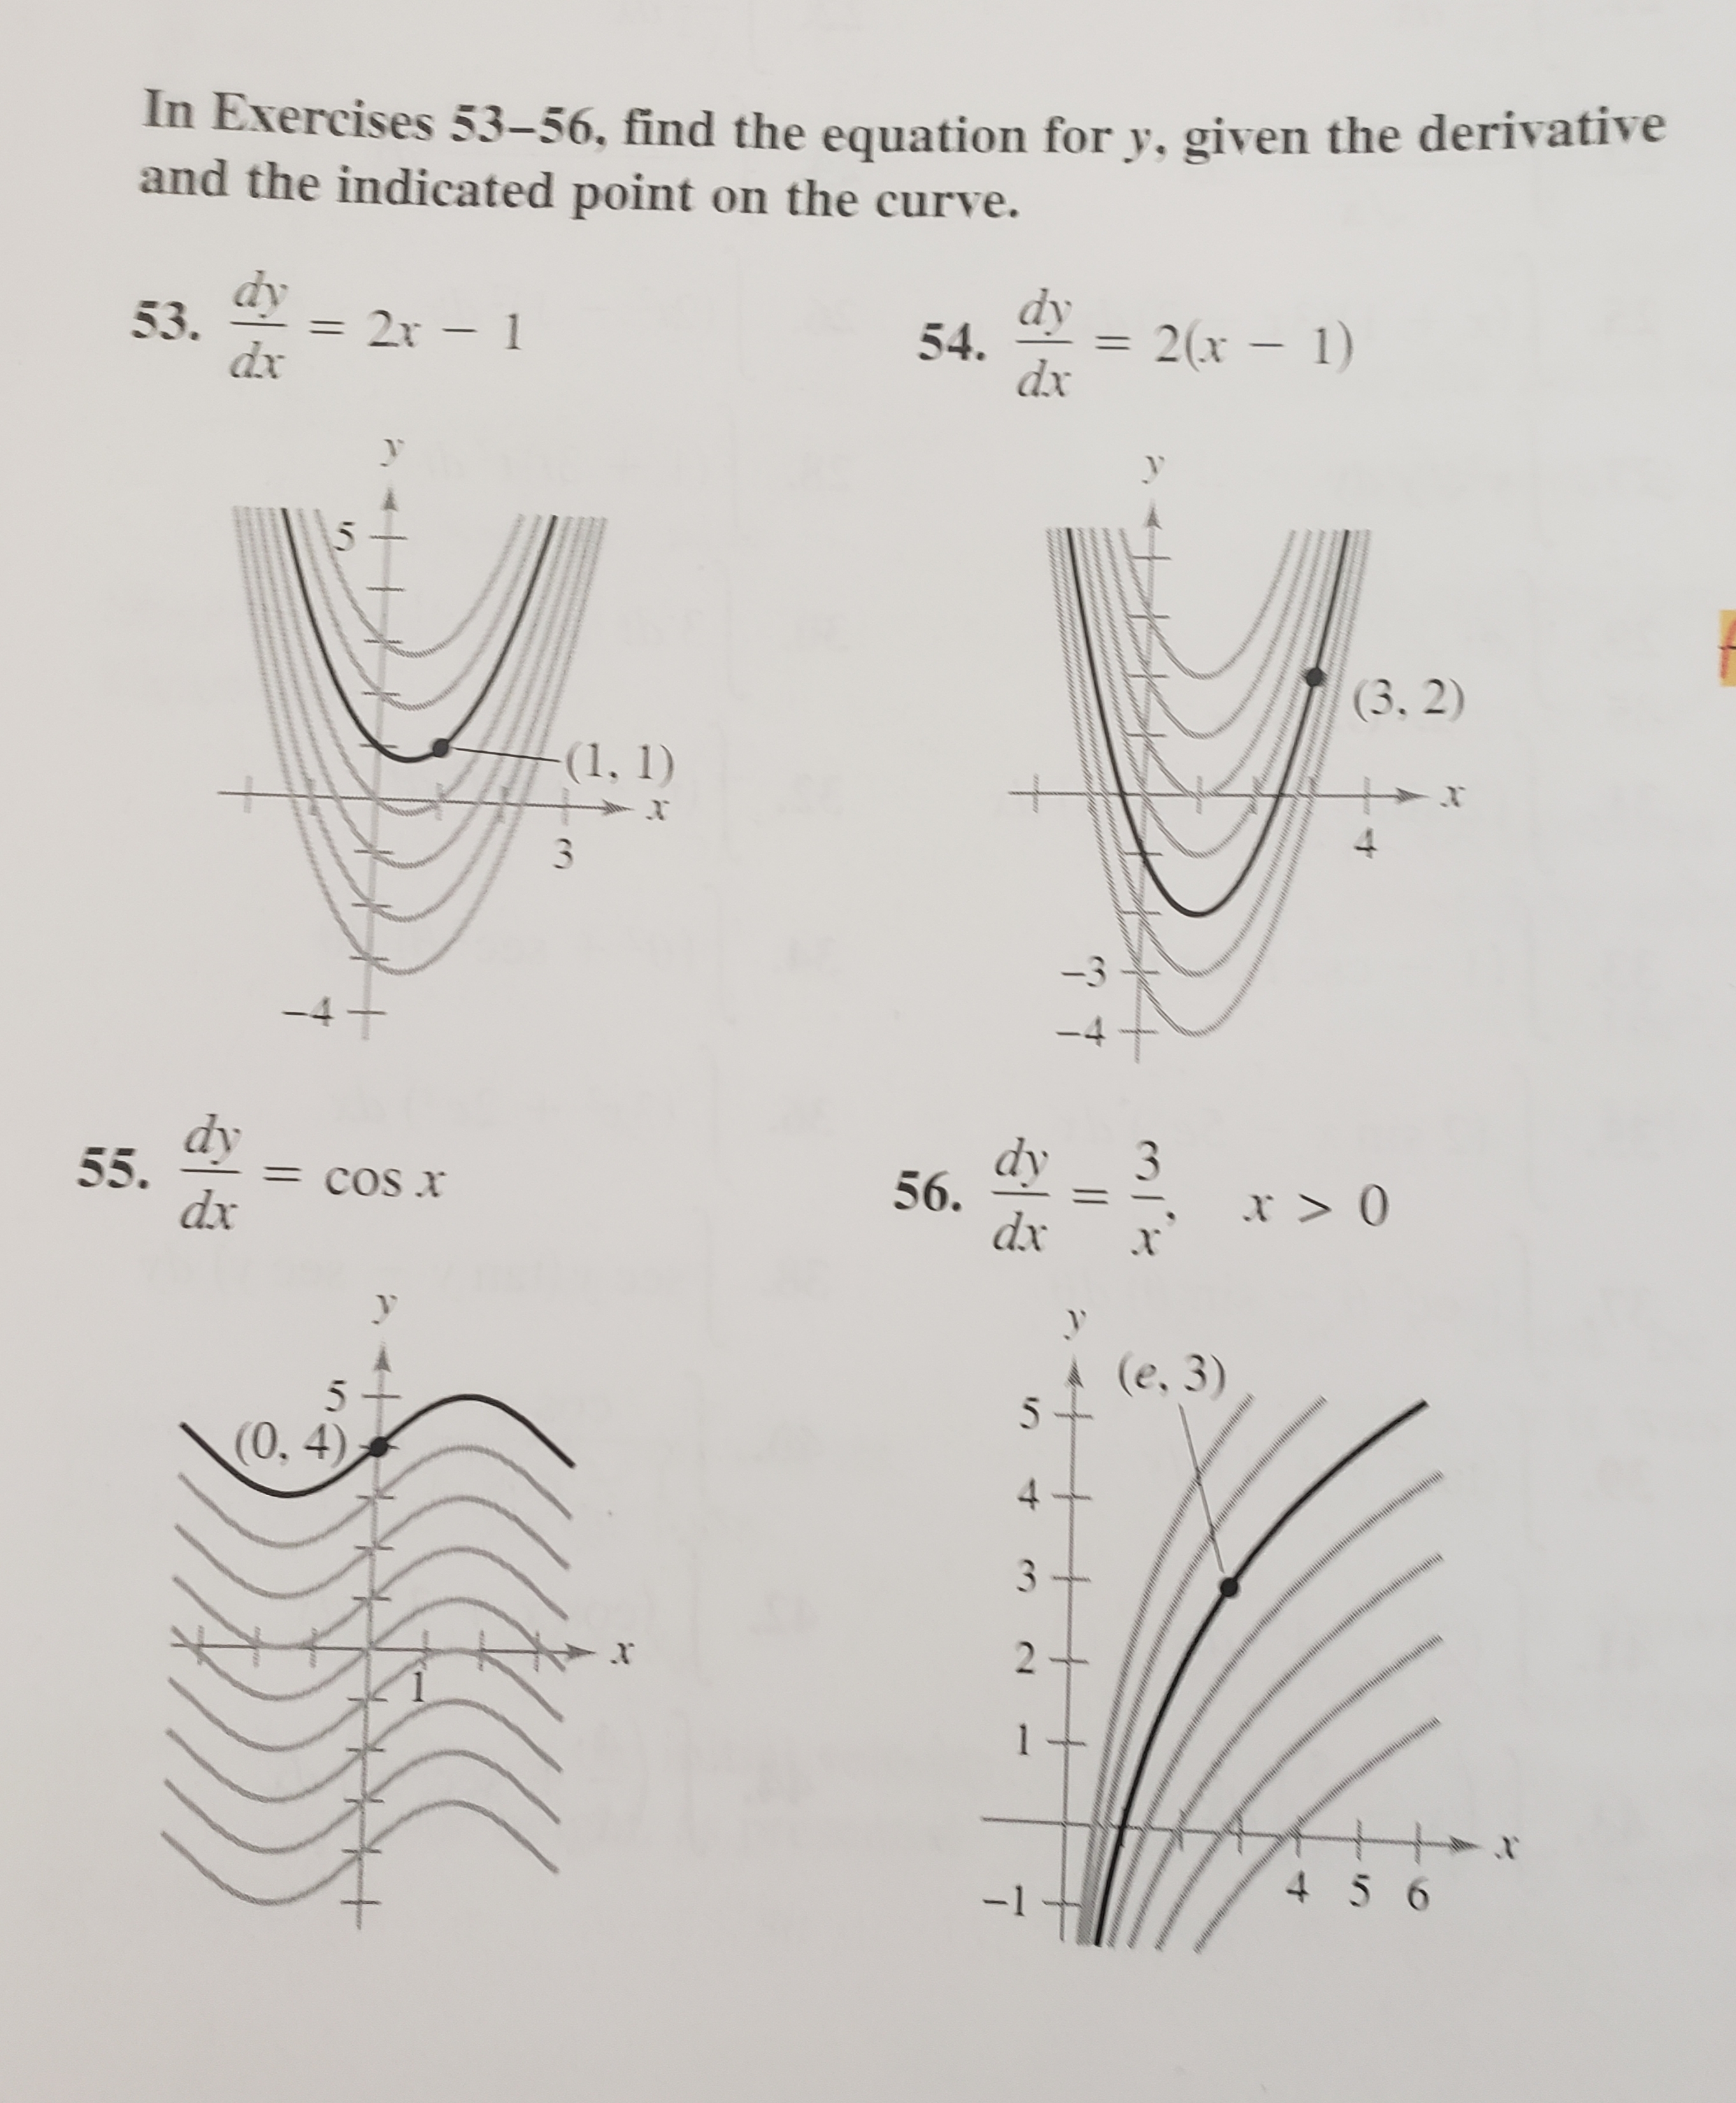 In Exercises 53-56, find the equation for y, given the deriv
and the indicated point on the curve.
dy
53.
dx
dy
2r - 1
= 2(x – 1)
%3D
54.
%3D
dx
(3, 2)
(1, 1)
3
4.
-3
-4+
